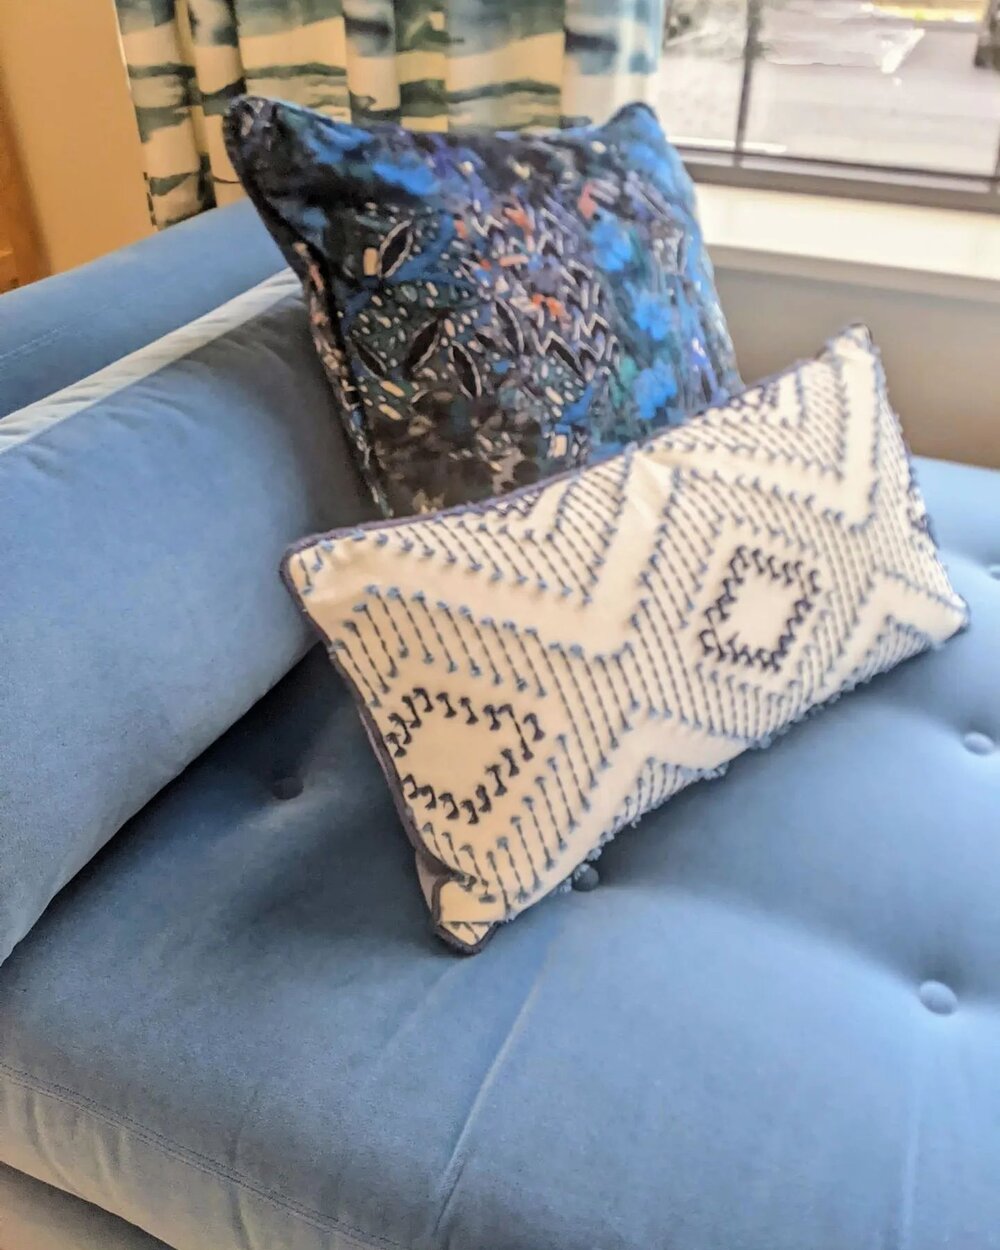 The luxurious softness of velvet and the rich color of blue come together  to create a sofa that is both stylish and inviting.  The perfect pillows just  intensify the beauty of this piece😍...oh and the coordinating drapery adds a touch of elegance.